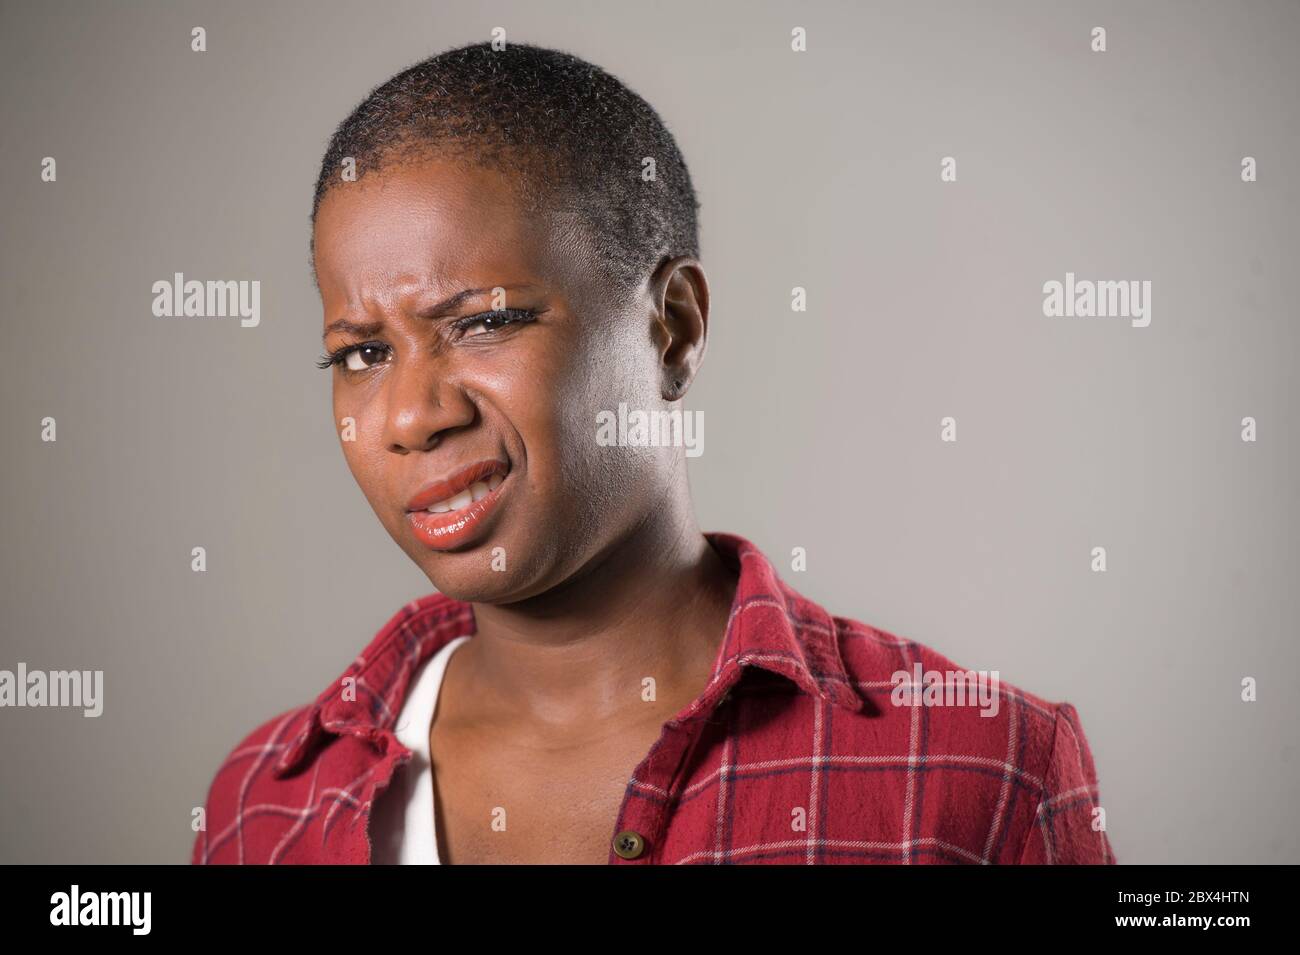 lifestyle portrait if young unhappy and pretty afro American woman in contempt and disgust face expression as if disliking or finding disgusting isola Stock Photo